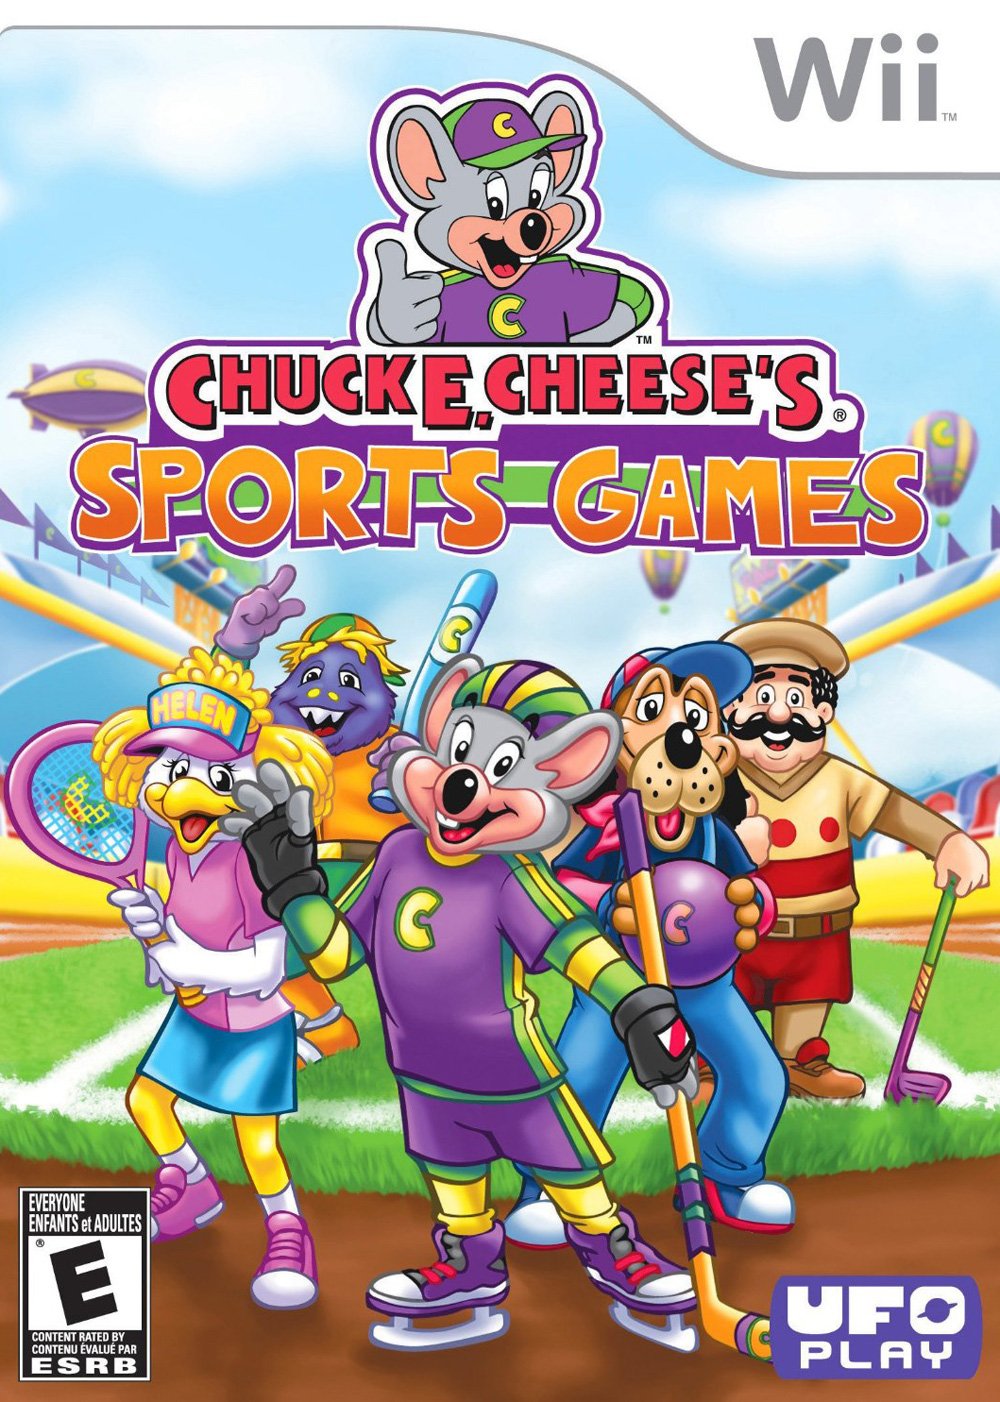 Image of Chuck E. Cheese's Sports Games